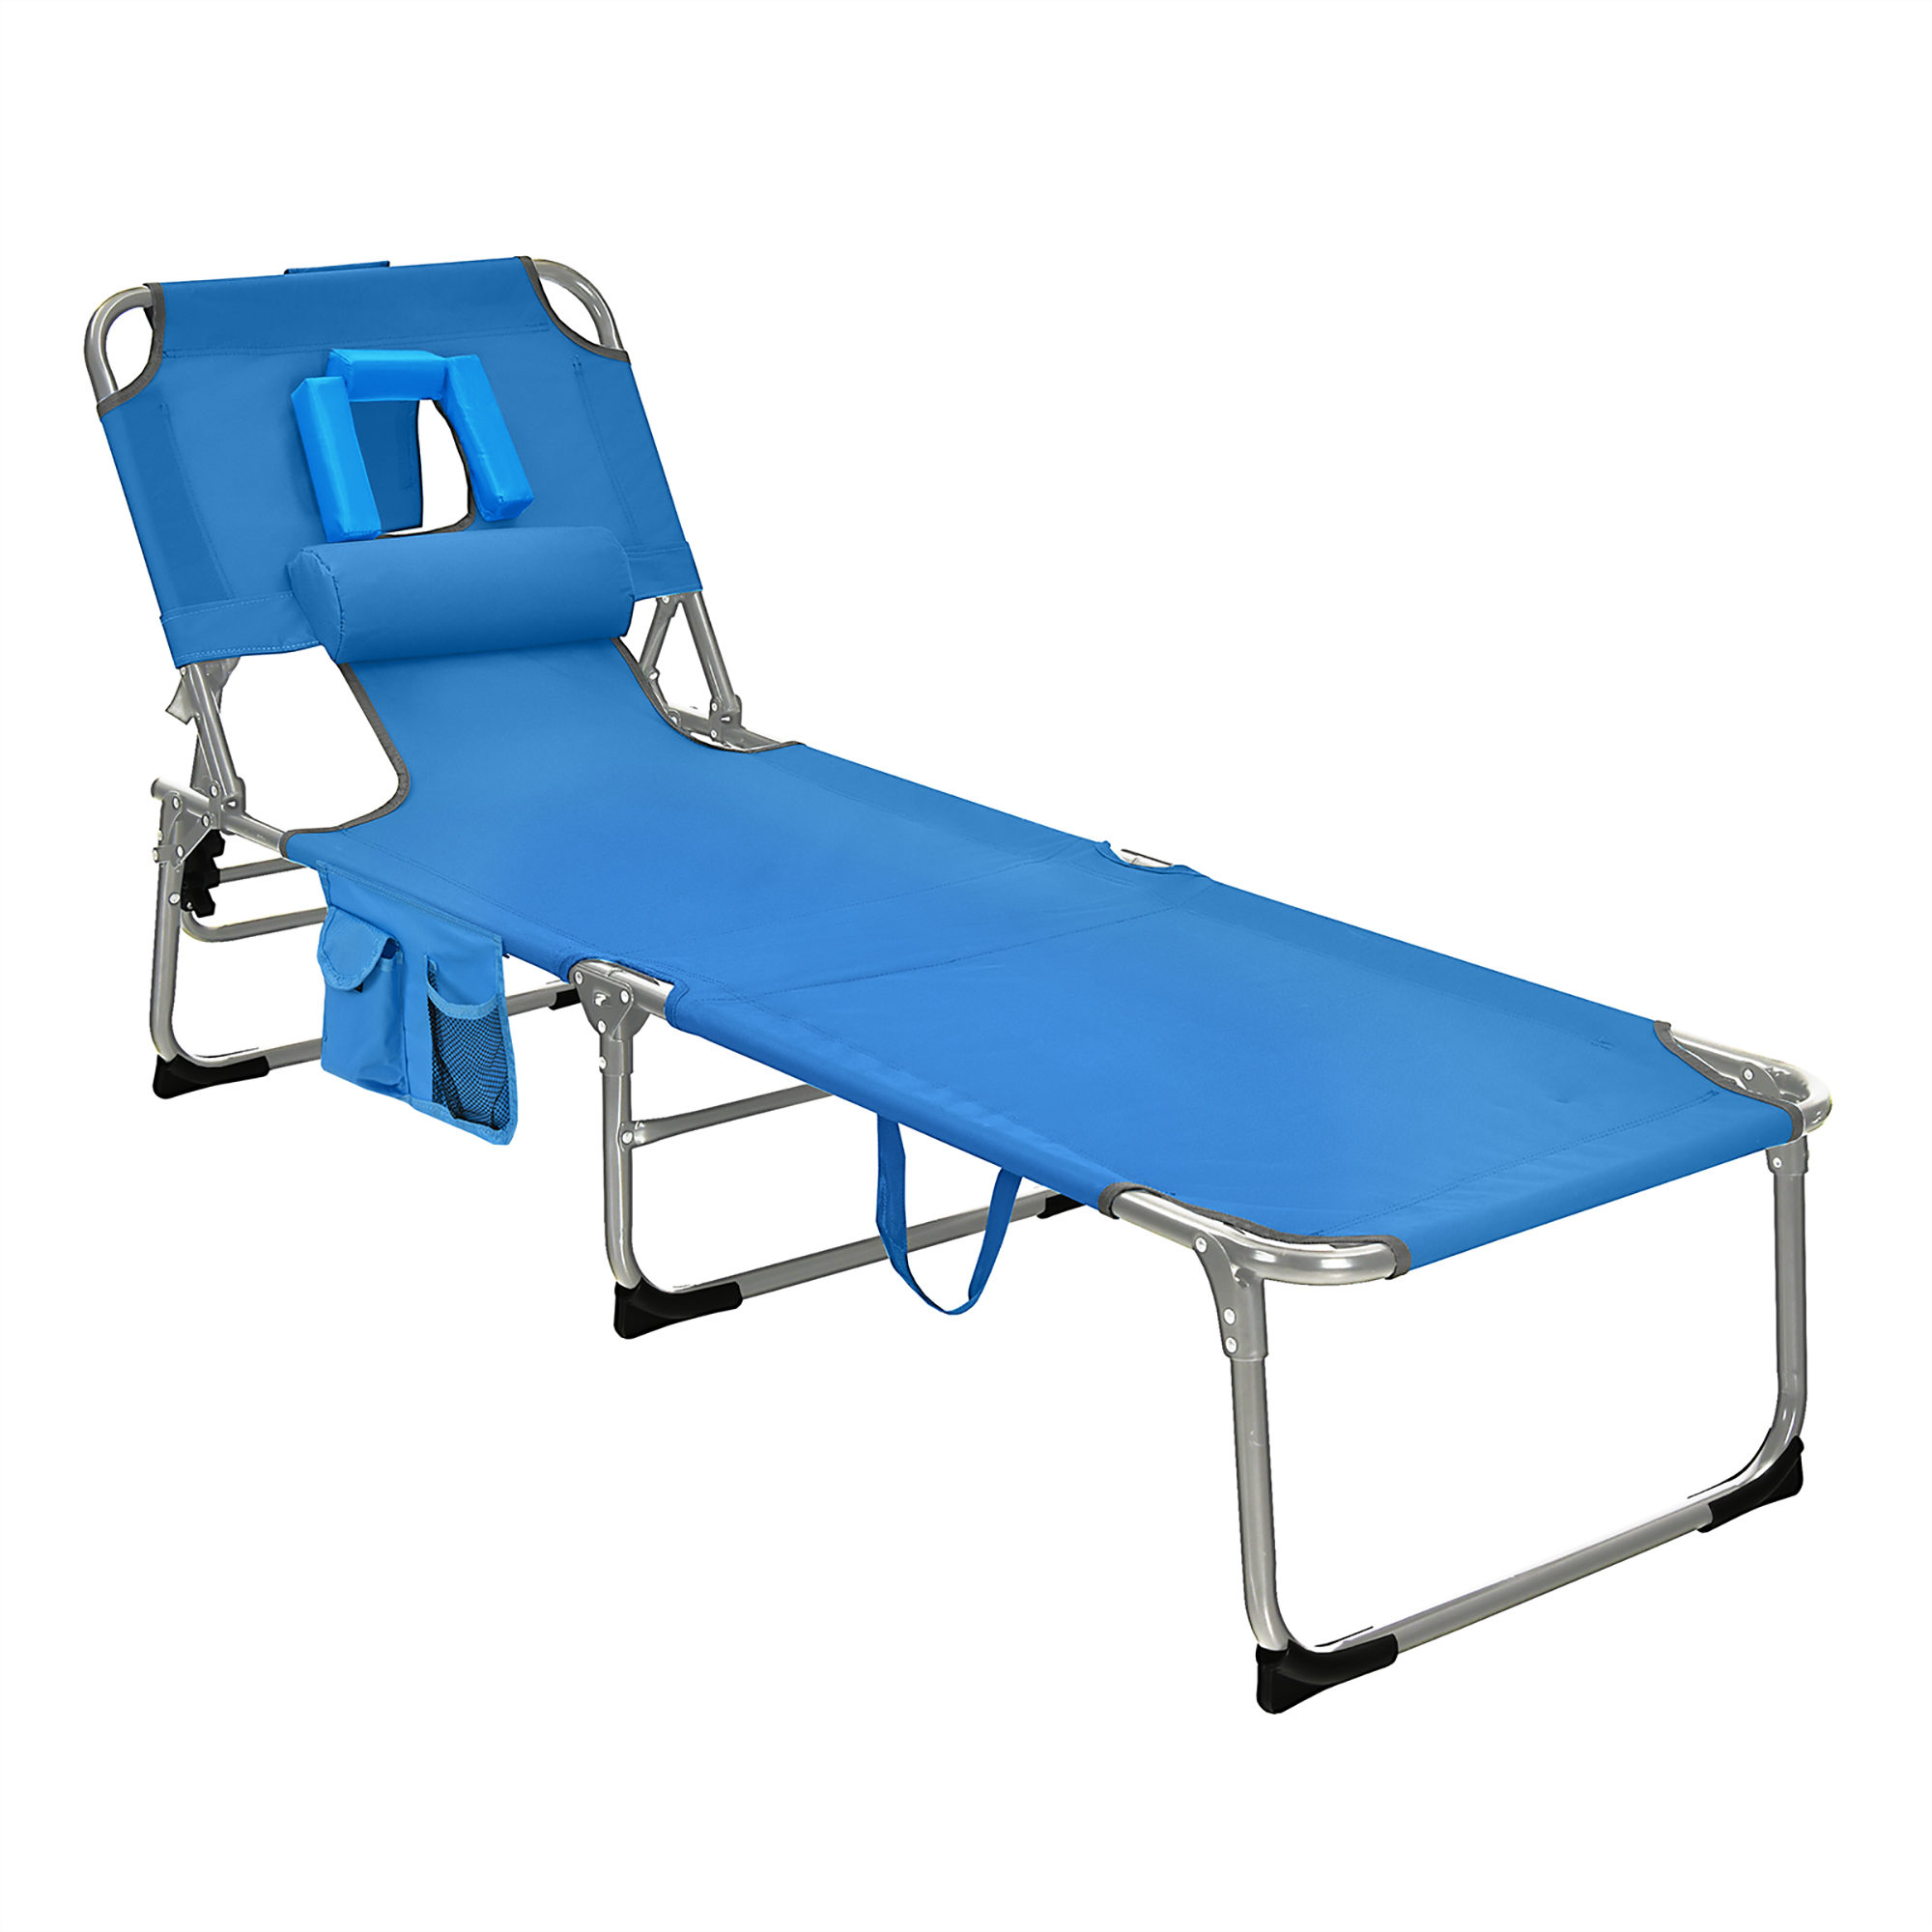 Goplus Outdoor Beach Lounge Chair Folding Chaise Lounge with Pillow Blue - image 2 of 8